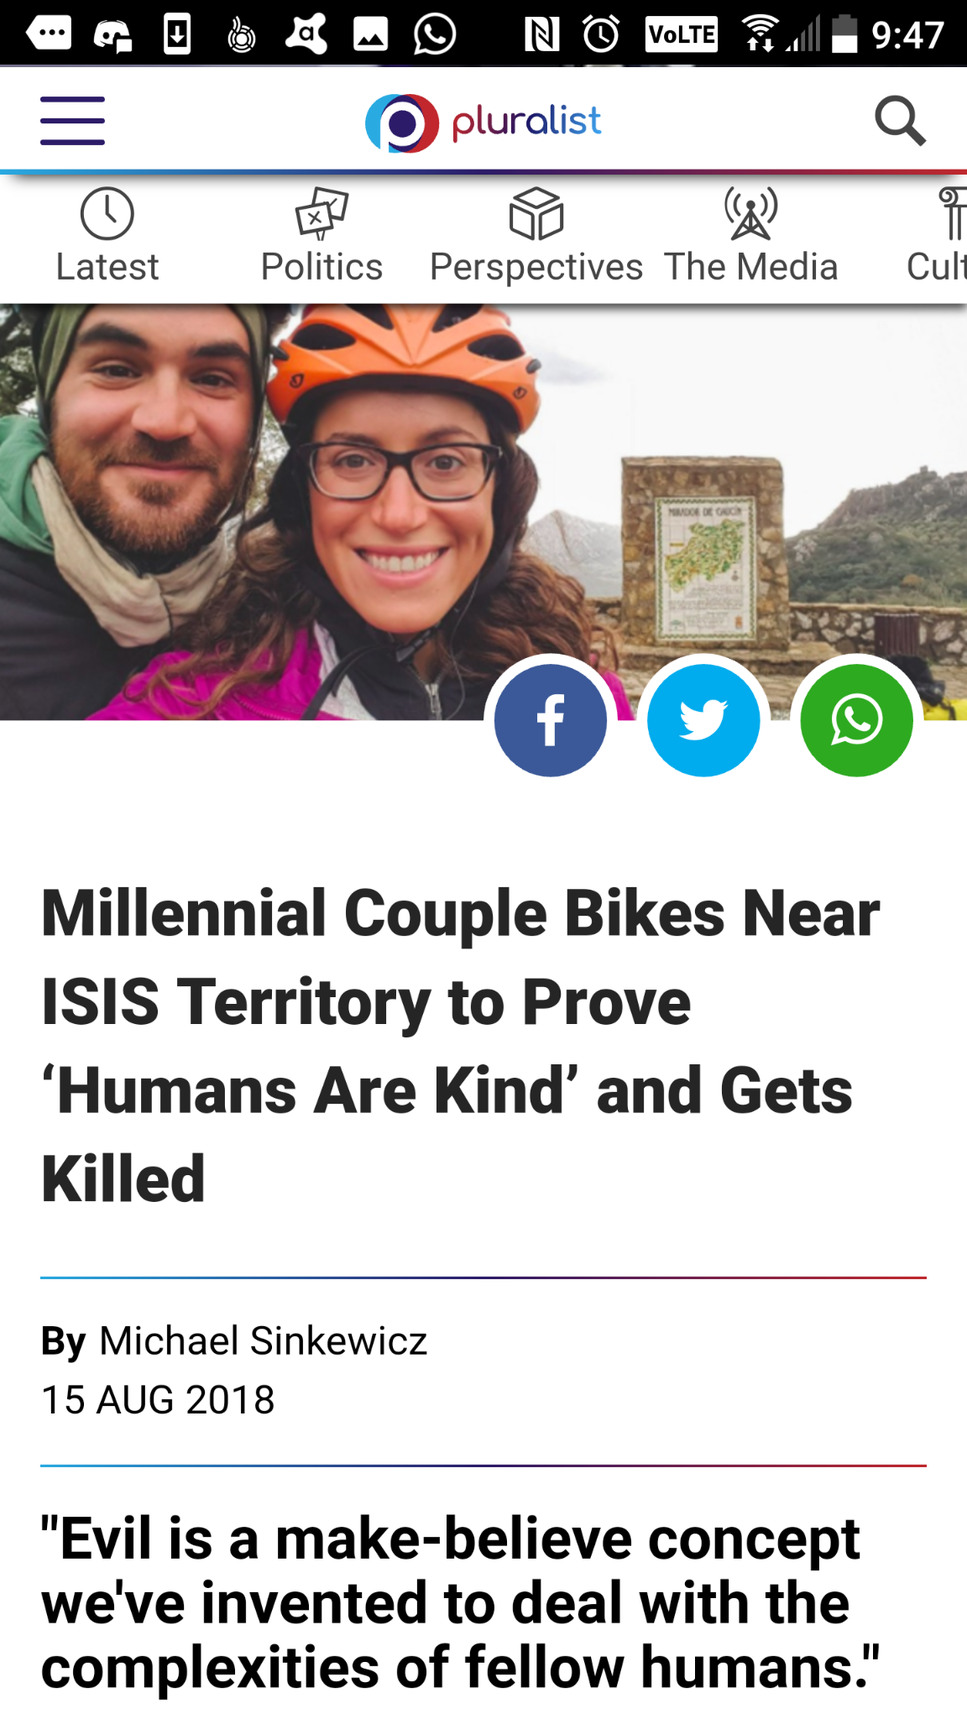 millennial couple bikes through isis territory meme - E 4 x 59 In C VoLTE pluralist a Latest Politics Perspectives The Media Cult Millennial Couple Bikes Near Isis Territory to Prove 'Humans Are Kind' and Gets Killed By Michael Sinkewicz "Evil is a makebe